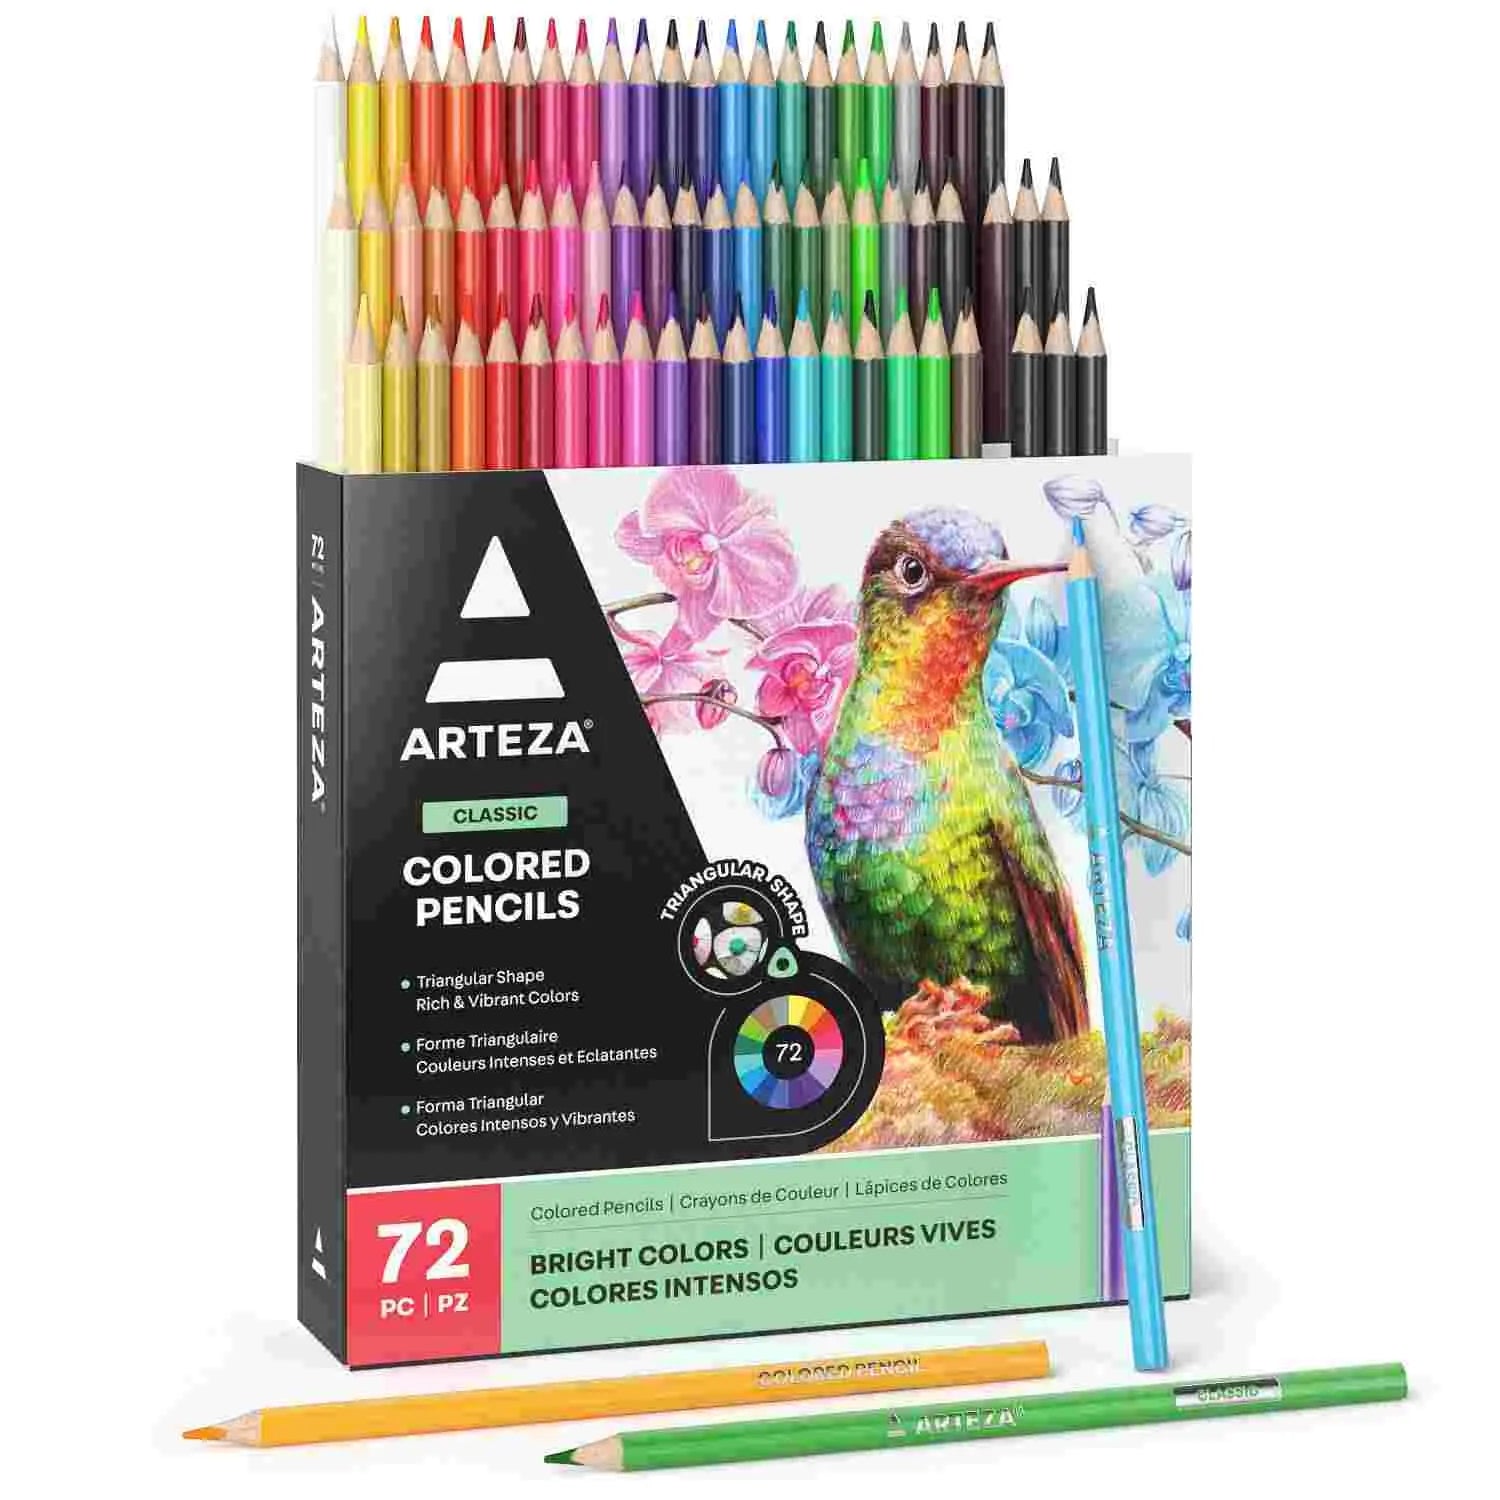 http://canvazo.com/cdn/shop/files/ARTEZA-Colored-Pencils-for-Adult-Coloring-with-Case_-72-Assorted-Drawing-Pencils-in-Vibrant-Colors_-Pencil-Set-for-Coloring-Books-and-Journals_-Triangular-Shape_-Professional-Art-Supp_6b979373-4a01-4775-afd6-07b5f9d0072d.jpg?v=1695380870